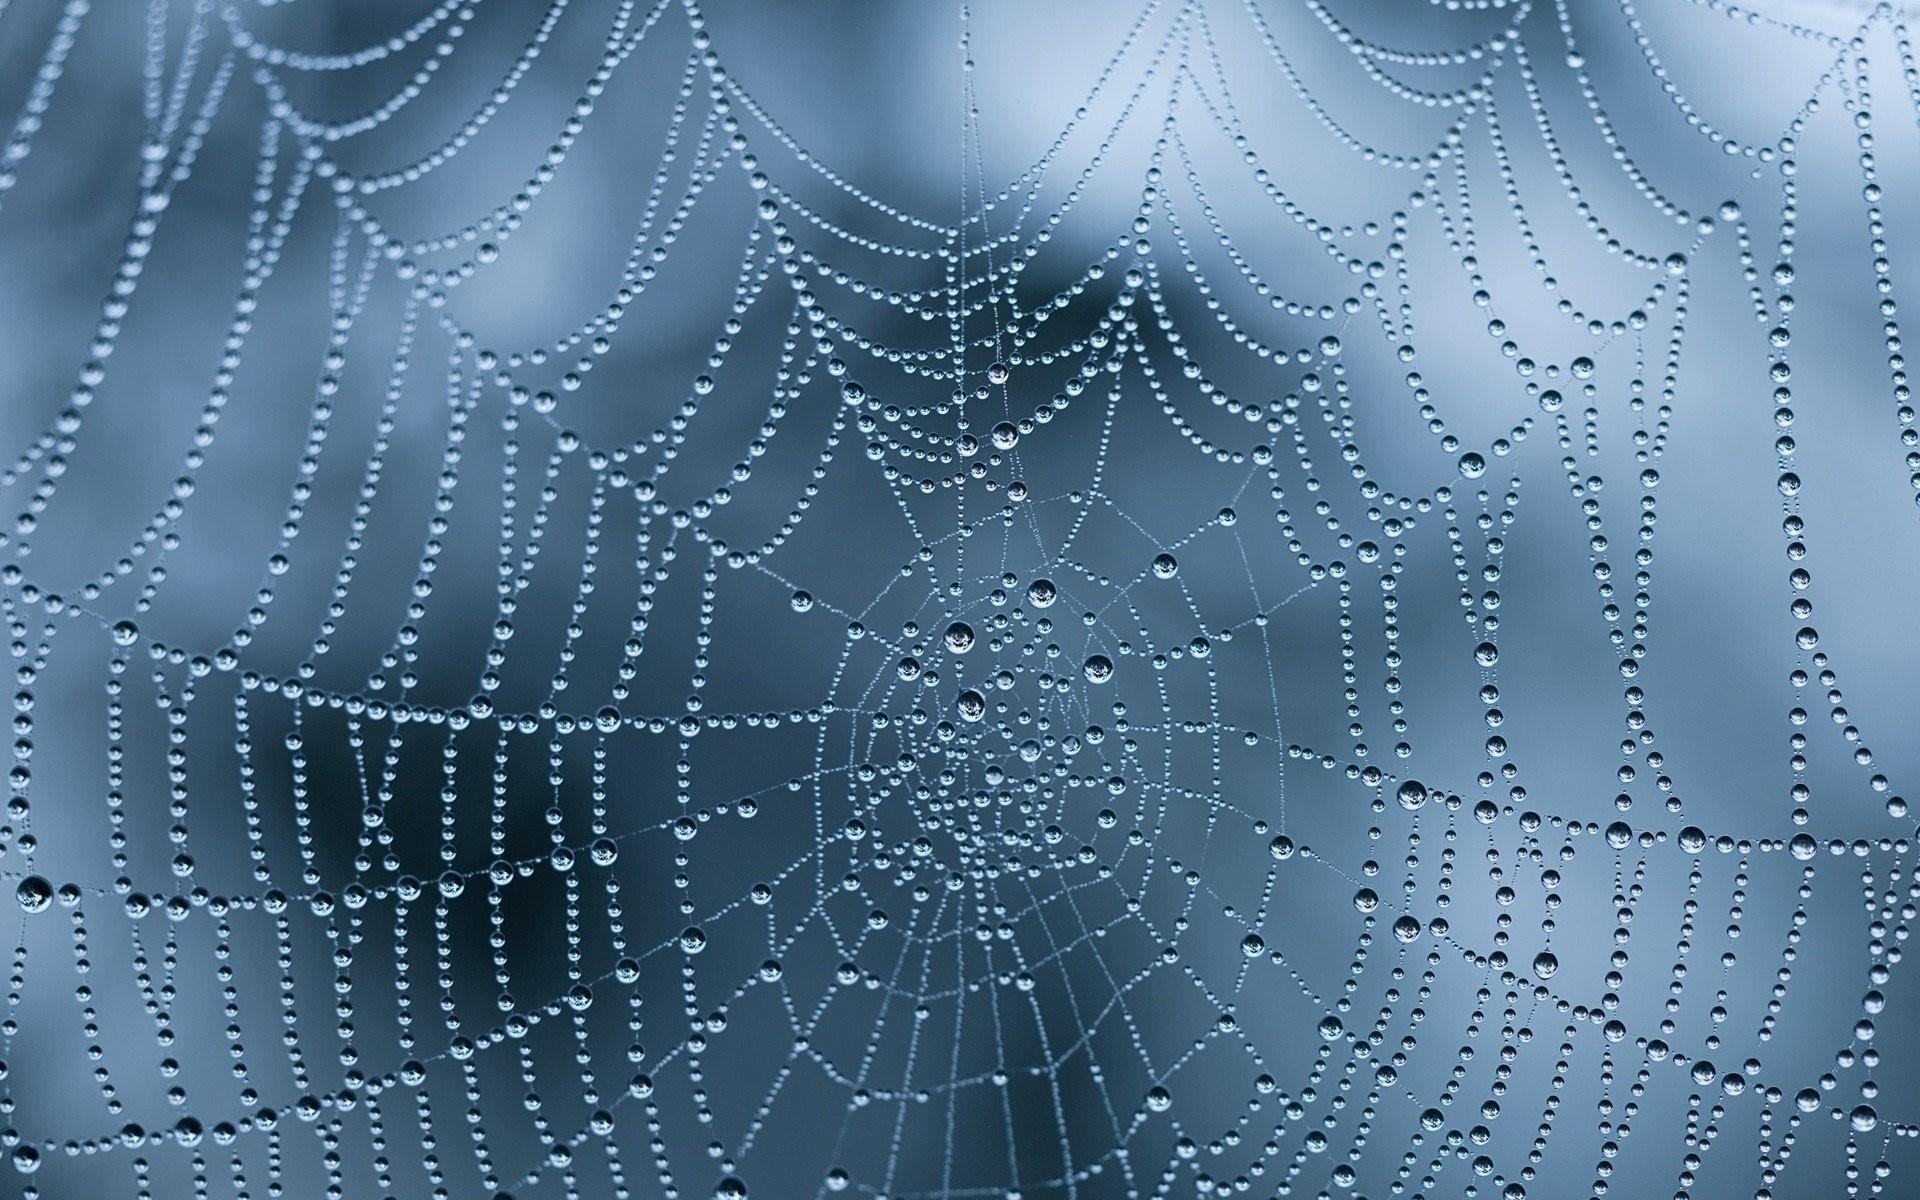 Spider Web Wallpaper background picture